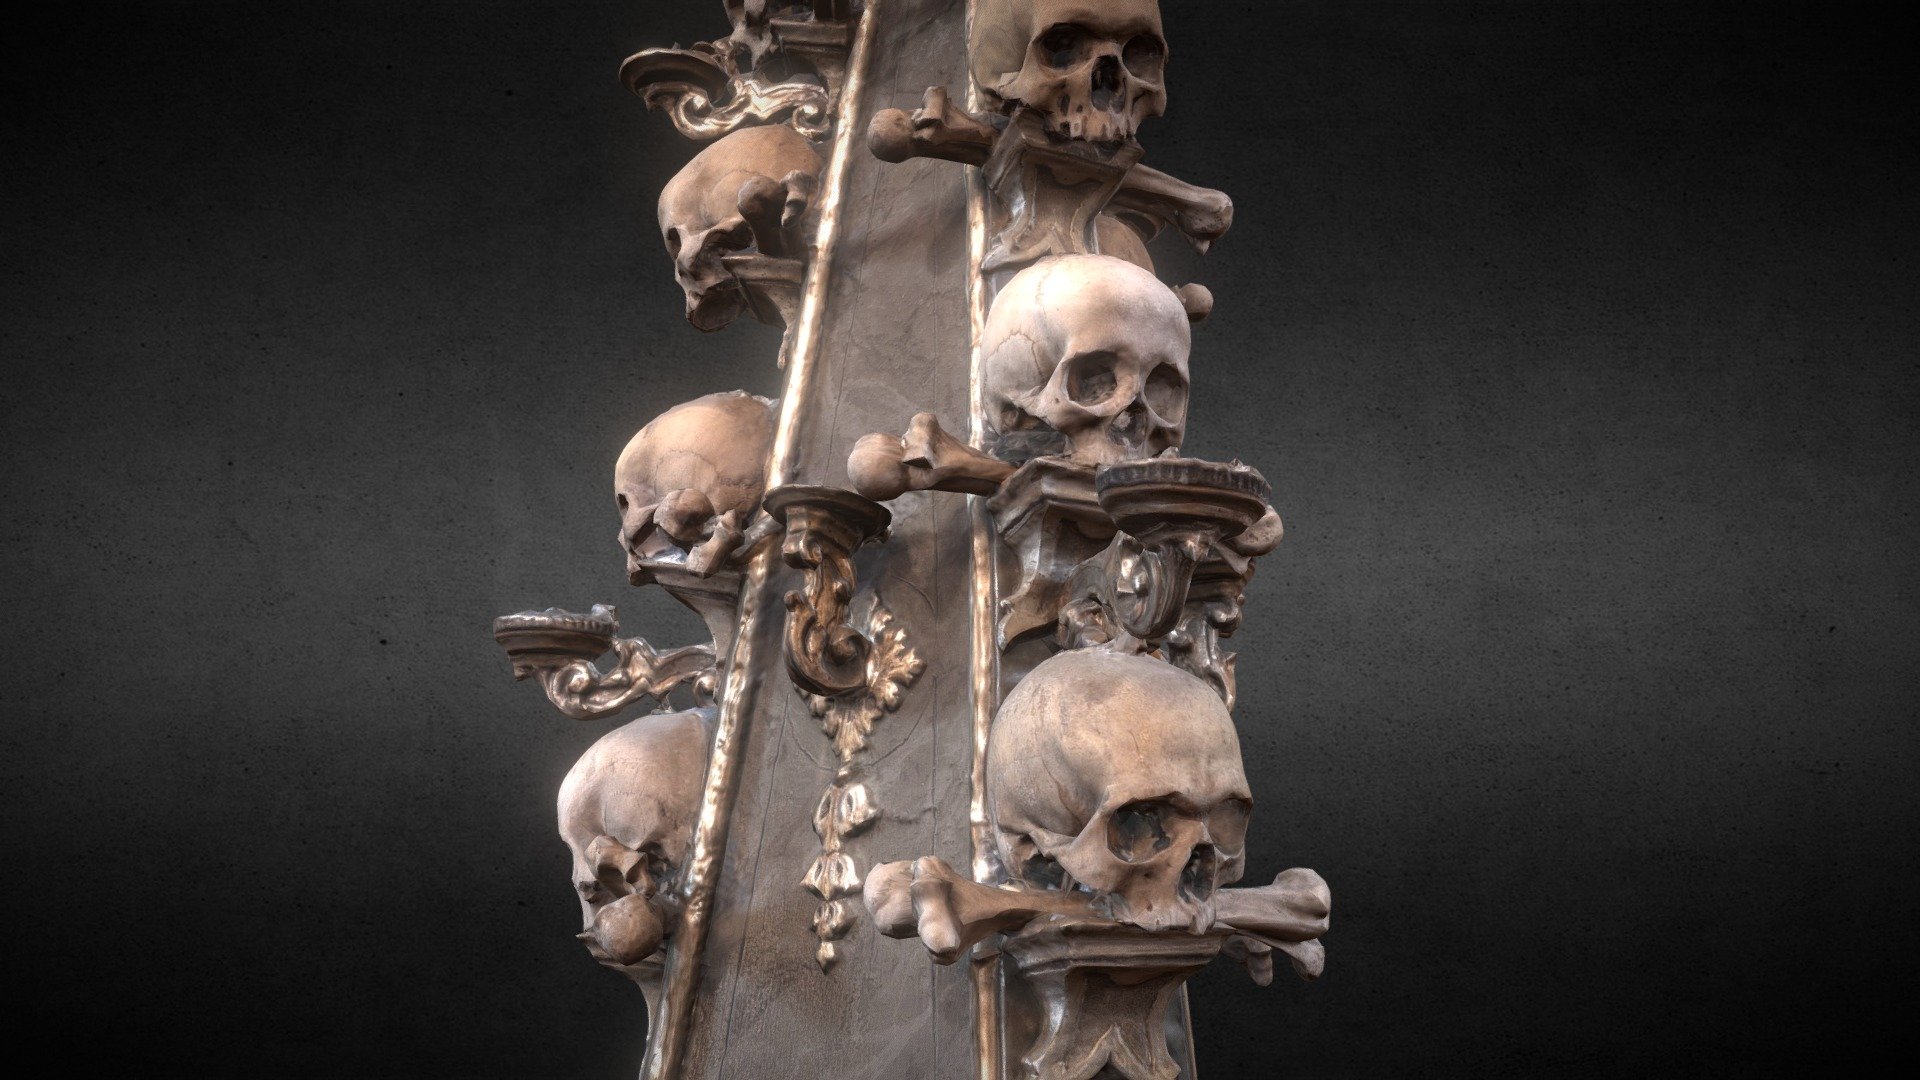 This started as a personal passion project, to preserve a historical record of the famous Sedlec Ossuary bone church in digital form through photography and photogrammetry. It has turned into an epic journey of discovery and importance, working with the assistance of the Sedlec Ossuary Director, and the Sedlec Roman Catholic Parish of Kutná Hora. This will be the most physically and historically accurate representation of the ossuary ever created, from measurements, blueprints, photoscanning, and historic records.

The Sedlec Ossuary is located in the town of Kutna Hora in the Czech Republic, which is a recognized UNESCO World Heritage site. The ossuary was decorated with the bones of over 60,000 humans 150 years ago, in a stunning artistic display that isn't replicated in any ossuary or catacomb in the world. The Sedlec Ossuary is also currently undergoing extensive, unprecedented renovations to help preserve it for future generations to enjoy.
sedlecossuary.mechanicalwhispers.com - Sedlec Ossuary Skull Candleholder Column - 3D model by MechanicalWhispers 3d model